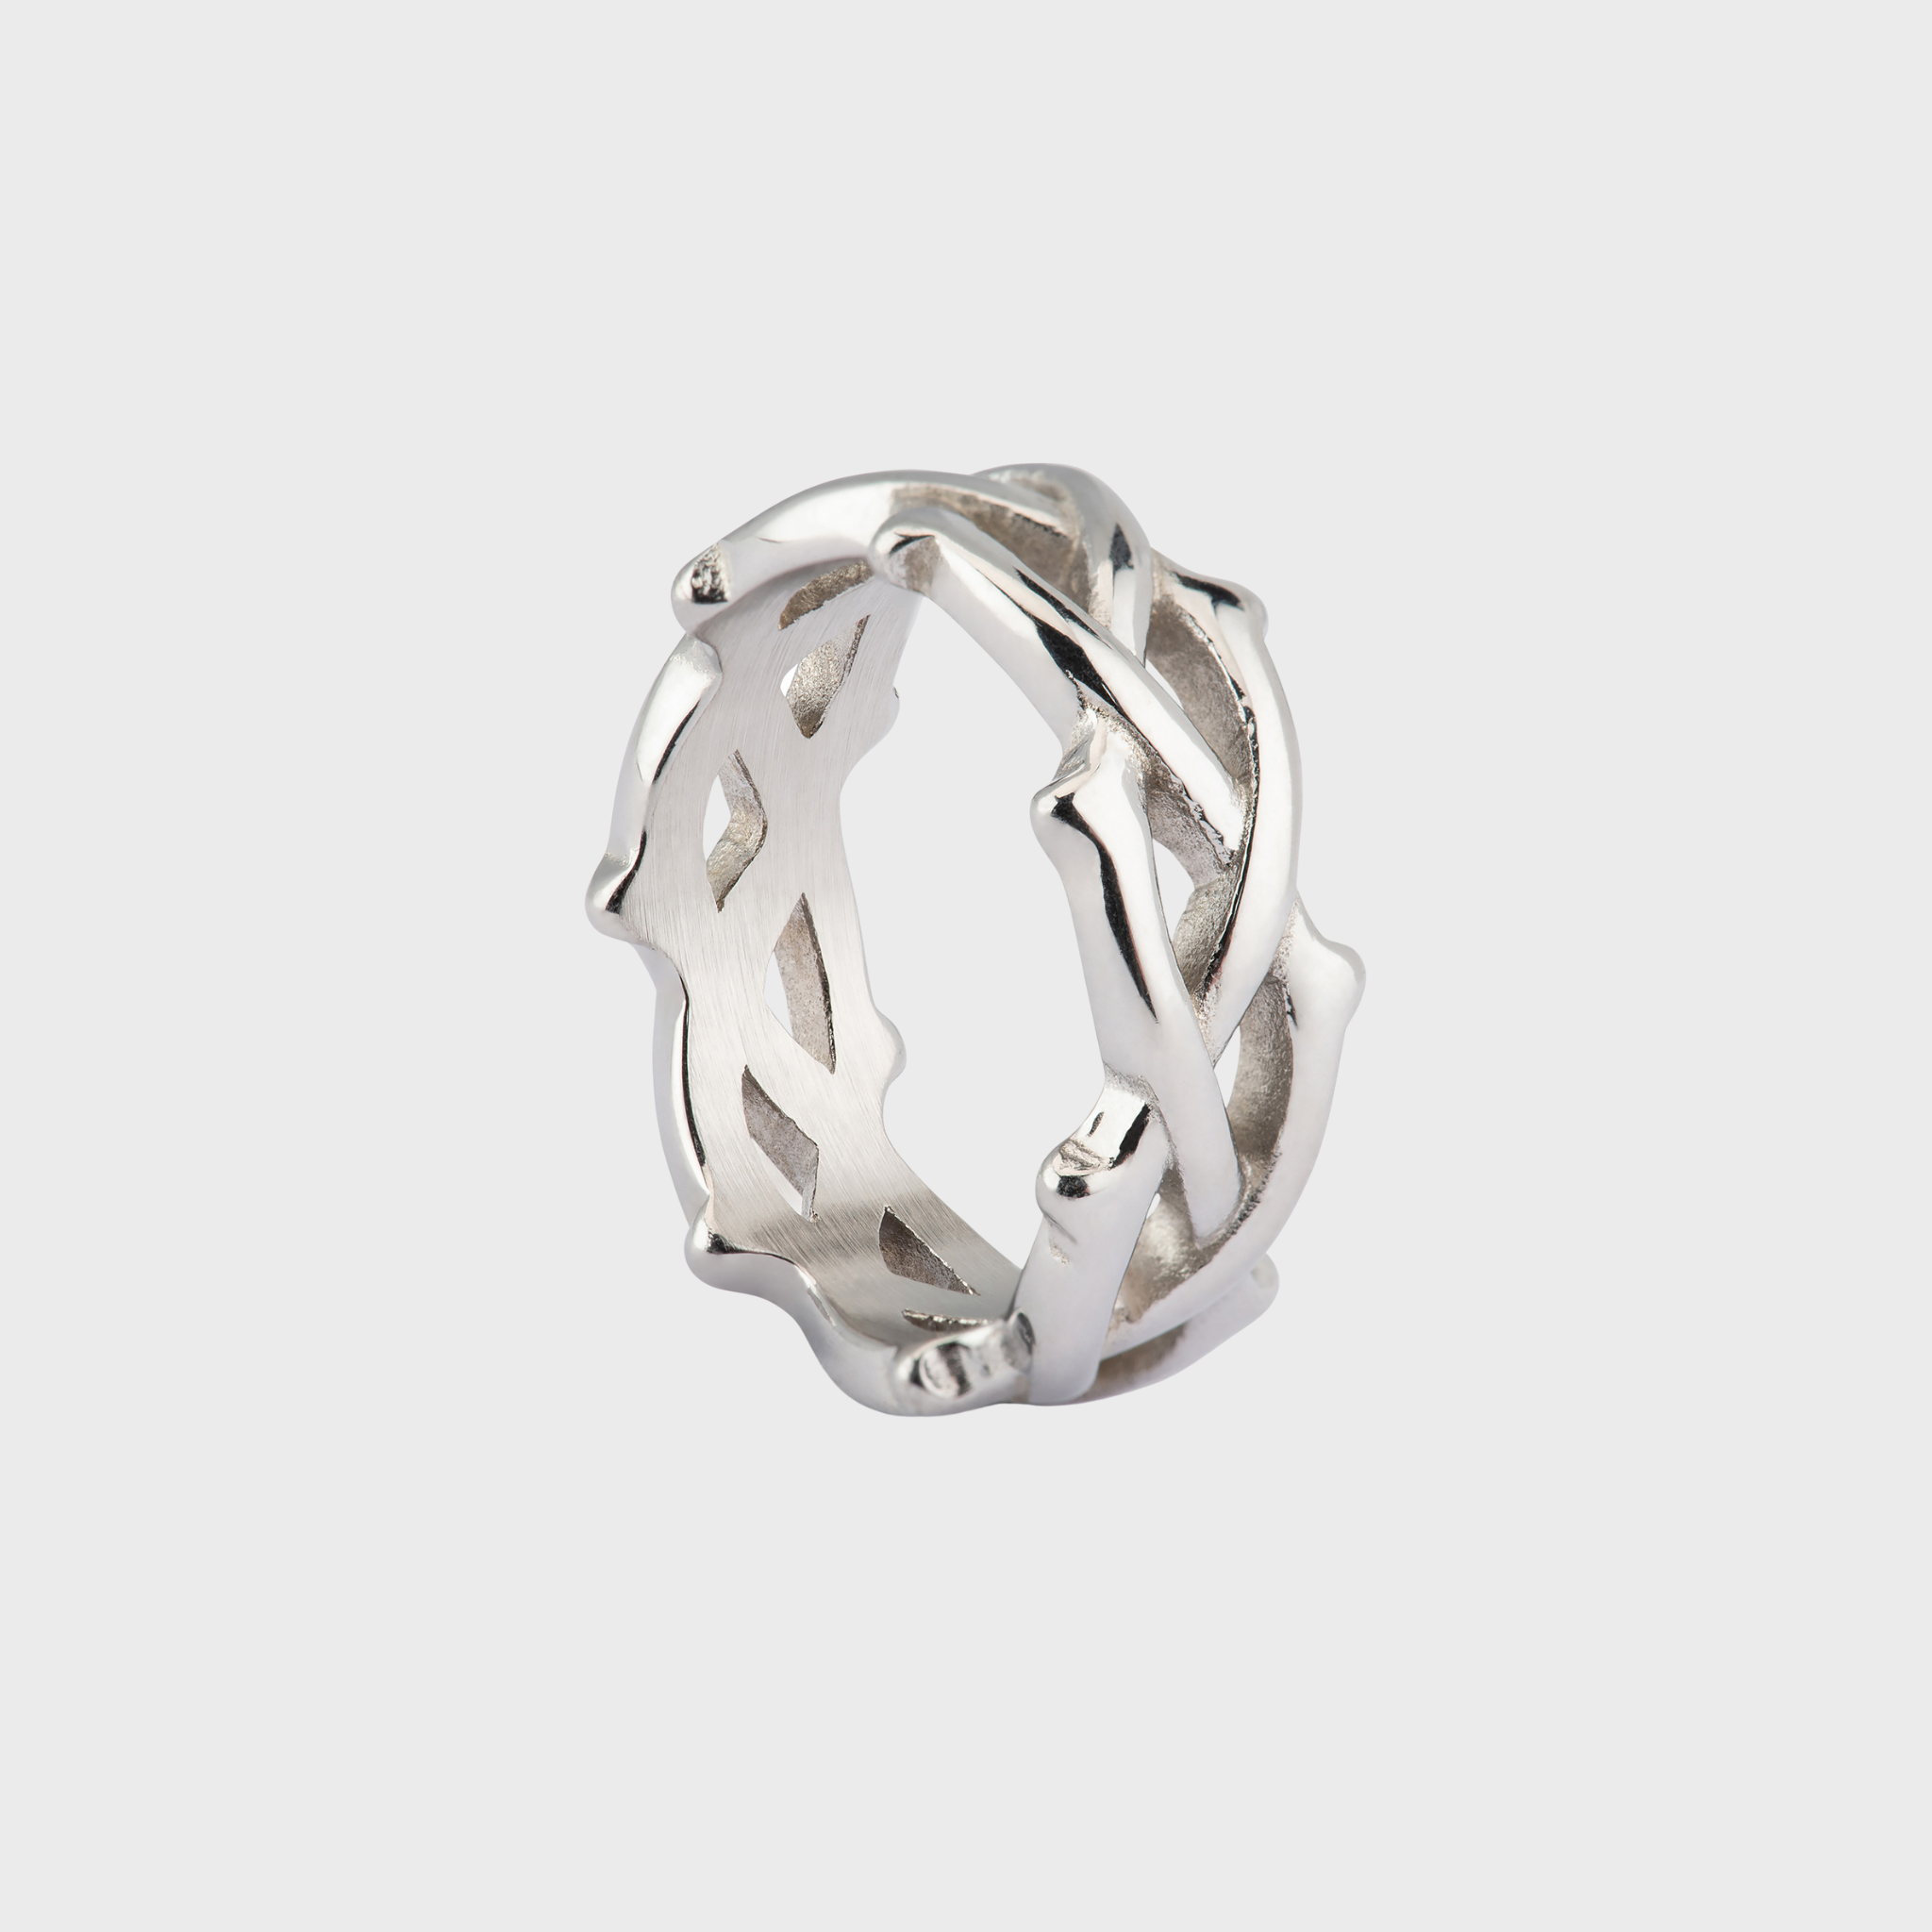 Stainless Steel Branch Style Design Ring